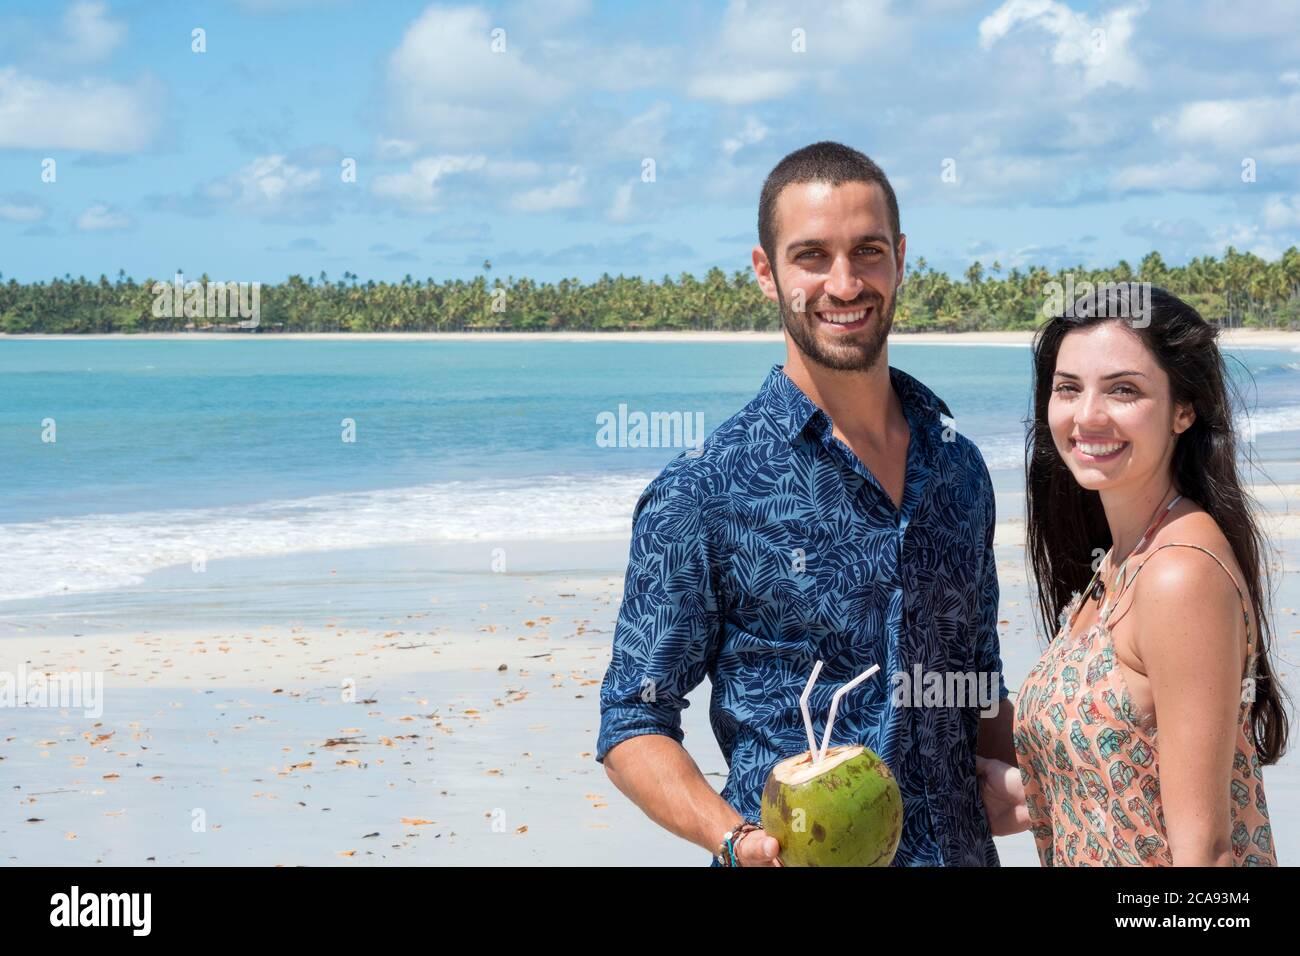 A good-looking Hispanic (Latin) couple smiling and standing together on a deserted beach, Brazil, South America Stock Photo